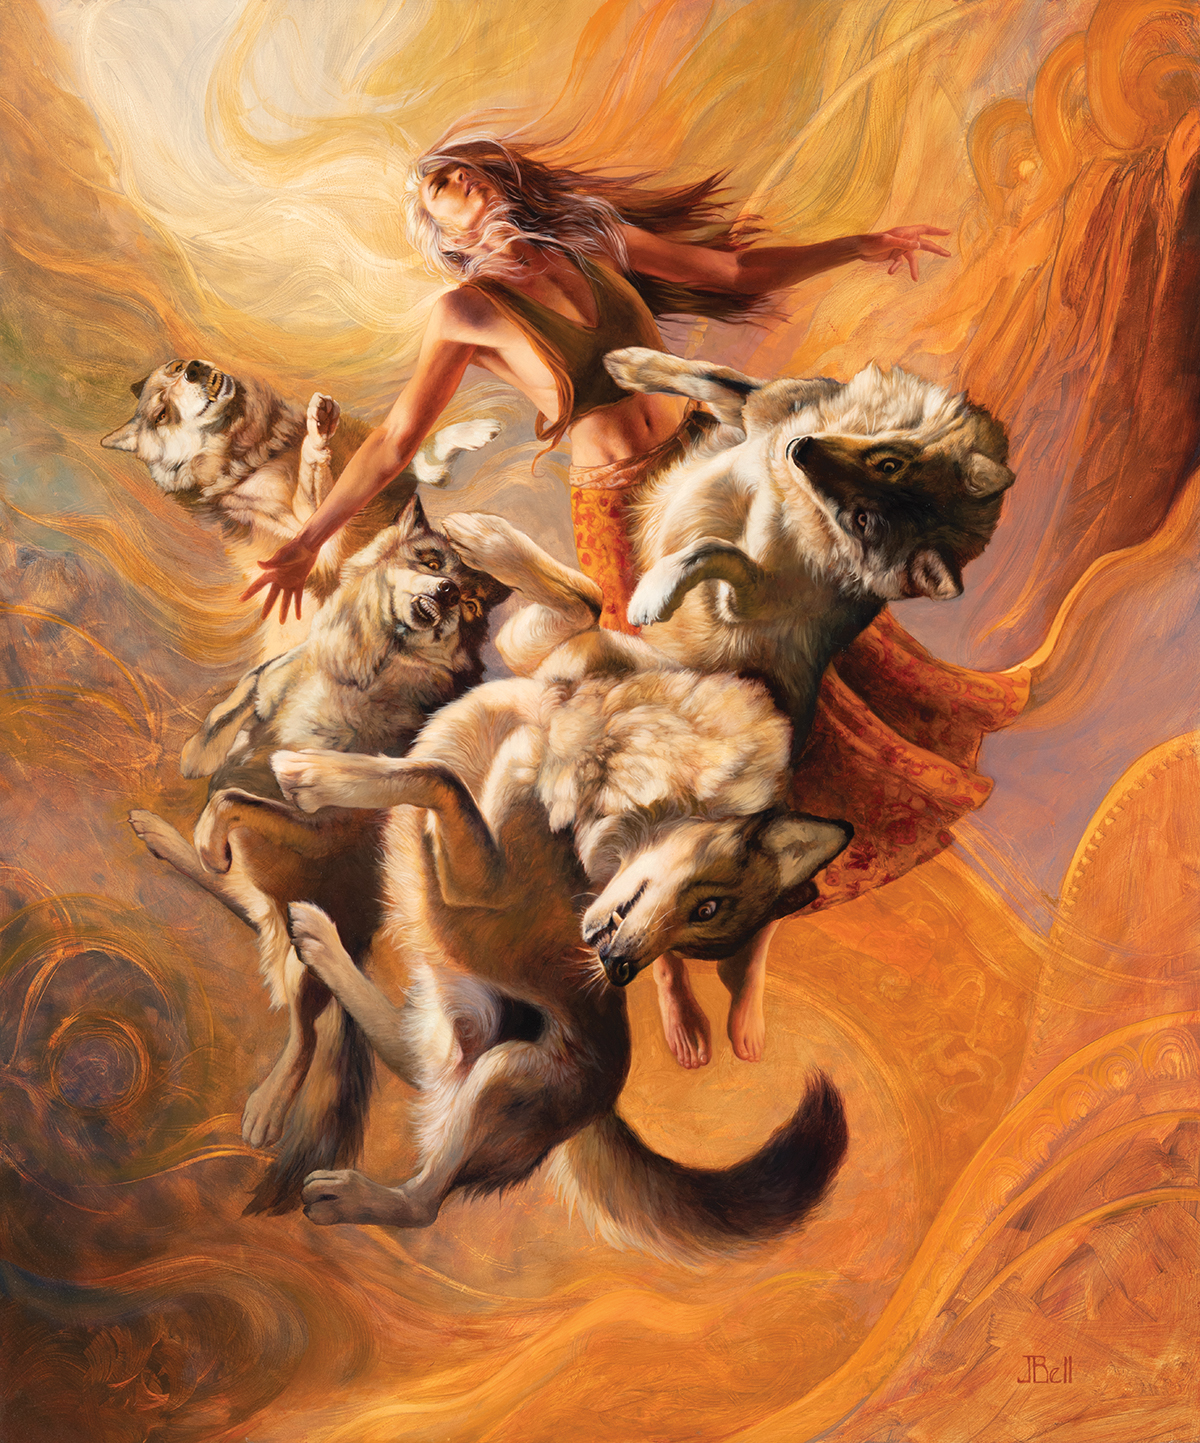 A pack of wolves floating in an orange sky with a long-haired woman.